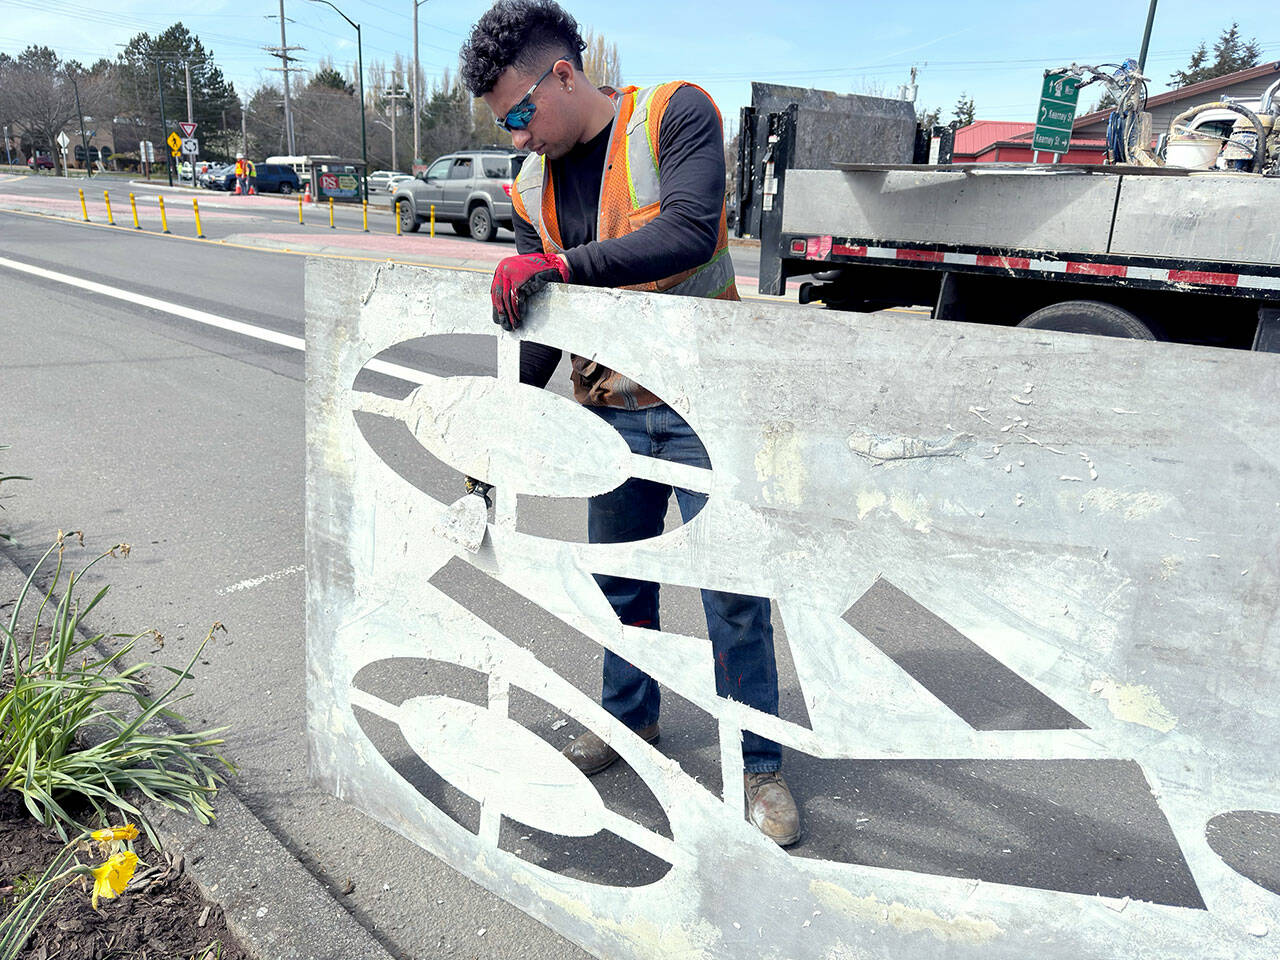 Fernando Cruz of Auburn, an employee of Specialized Pavement Marking in Pacific, cleans off a sign he used to paint a bicycle lane on Sims Way and Kearney Street, the site of the new roundabout. The workers needed at least two days of 47 degrees or above in order to paint the pedestrian crosswalks and other necessary markings. (Steve Mullensky/for Peninsula Daily News)